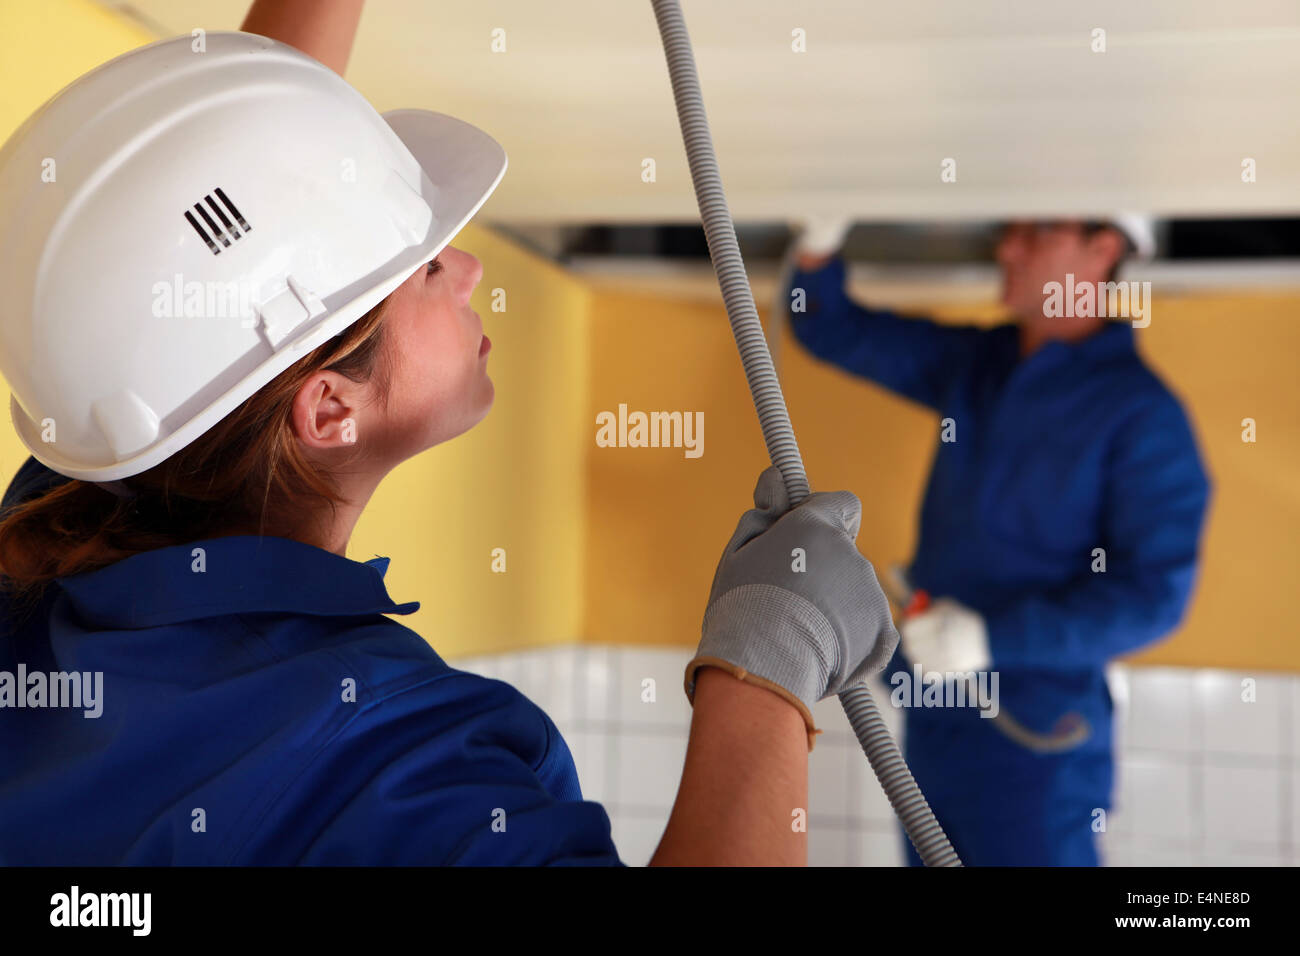 Electricians wiring a large room Stock Photo